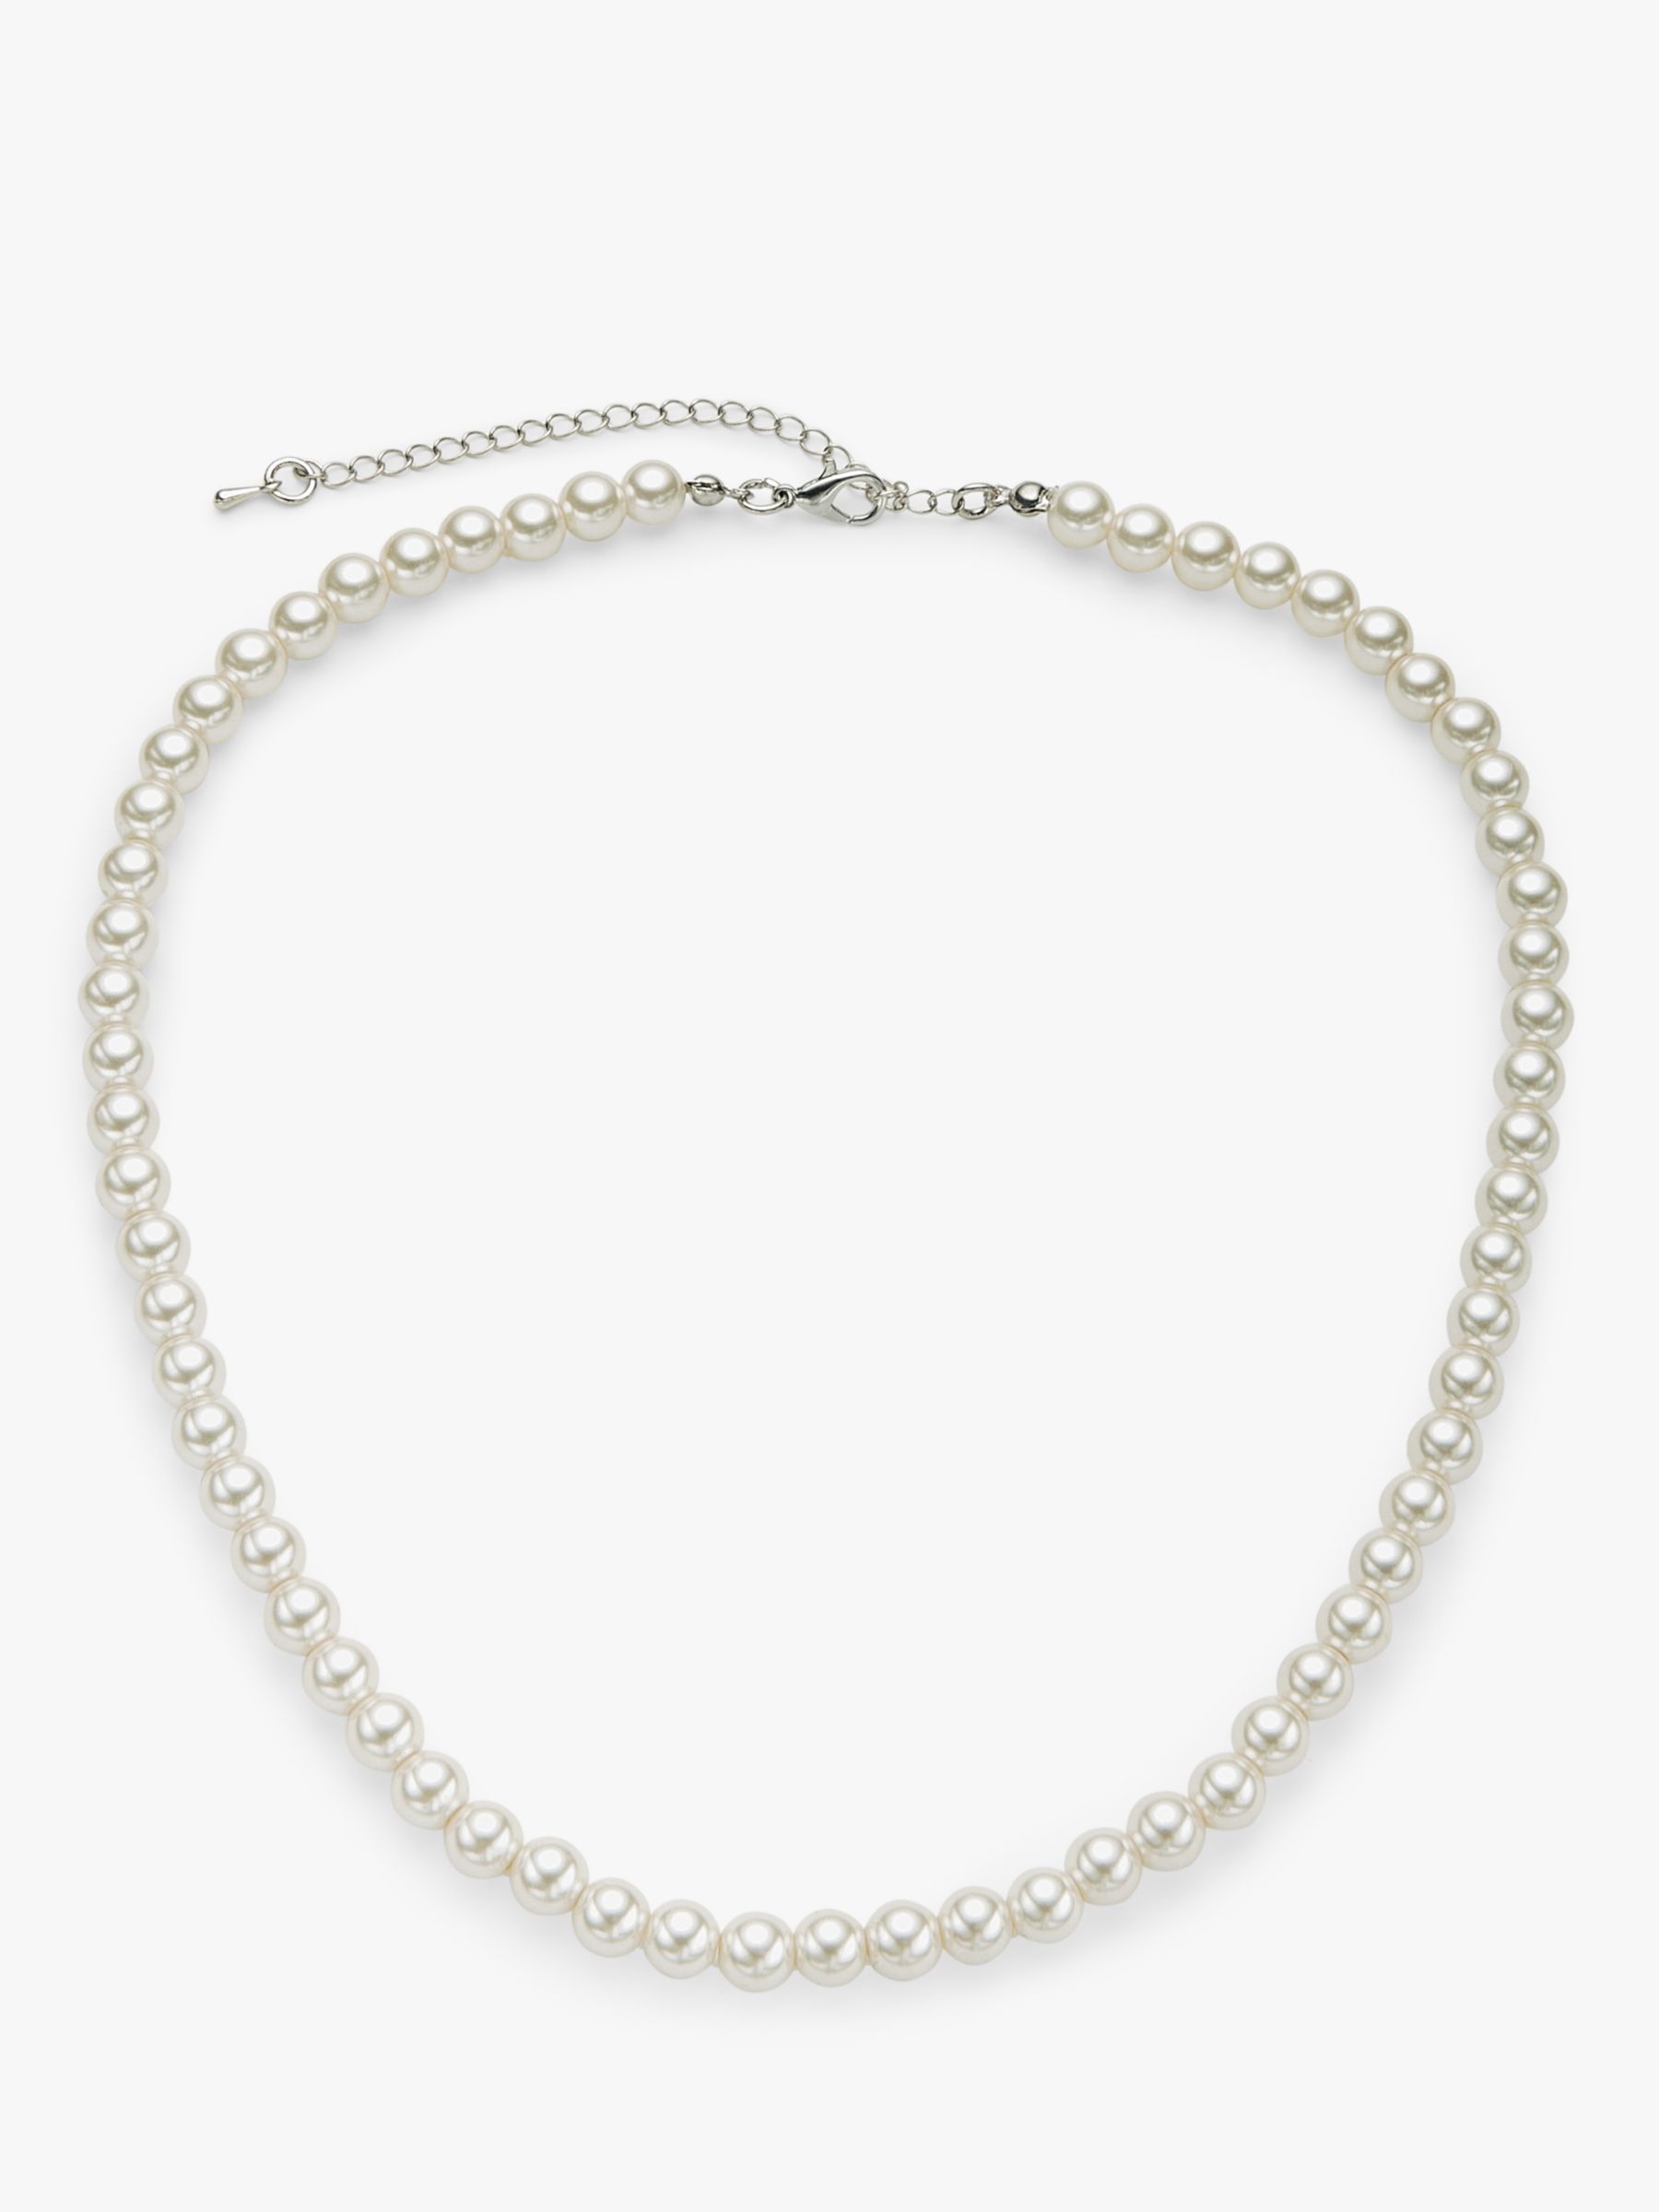 John Lewis Single Row Faux Pearl Necklace, Silver at John Lewis & Partners